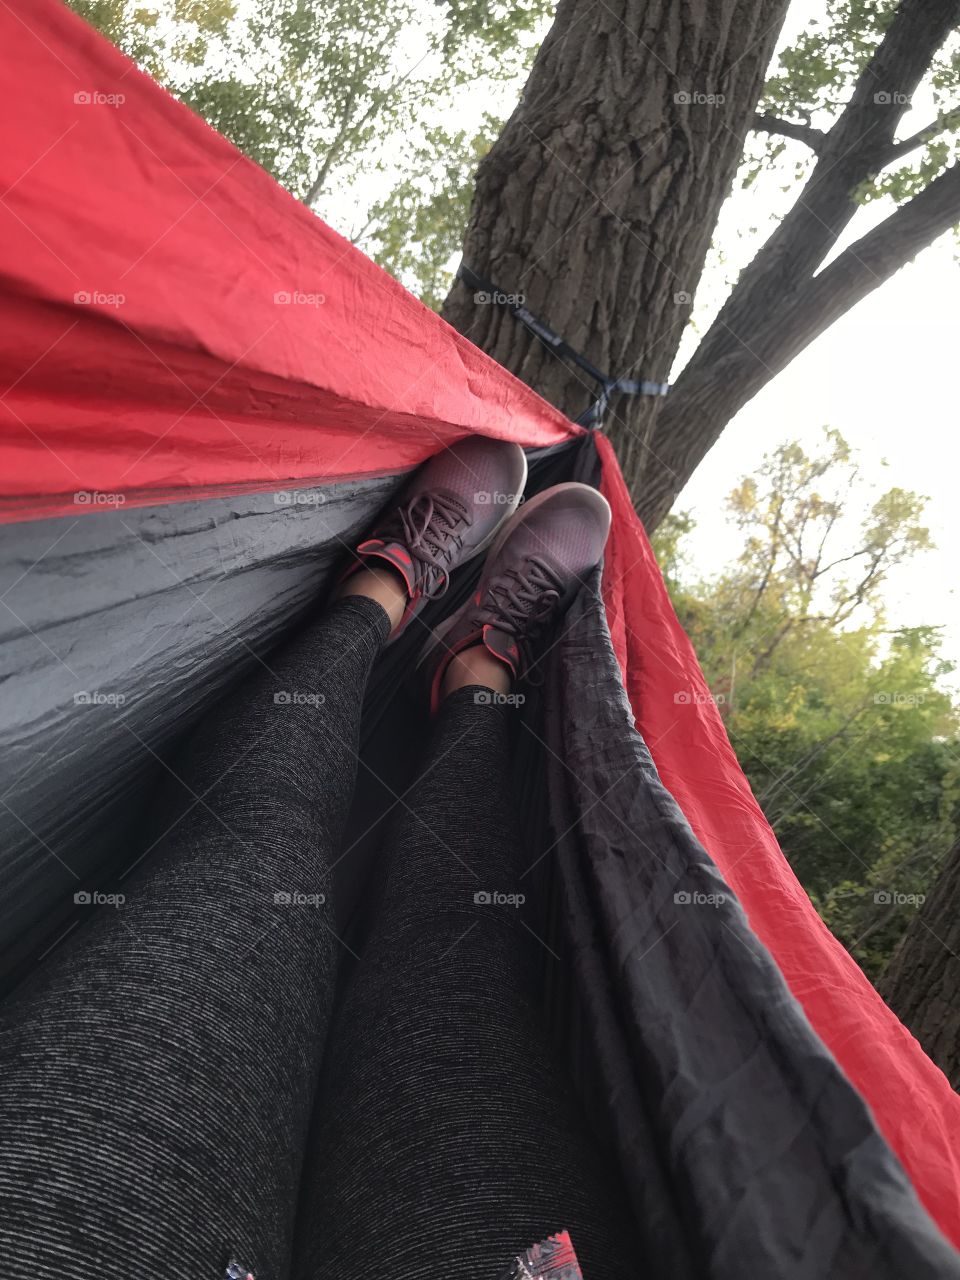 Hammocking in a peaceful forested spot